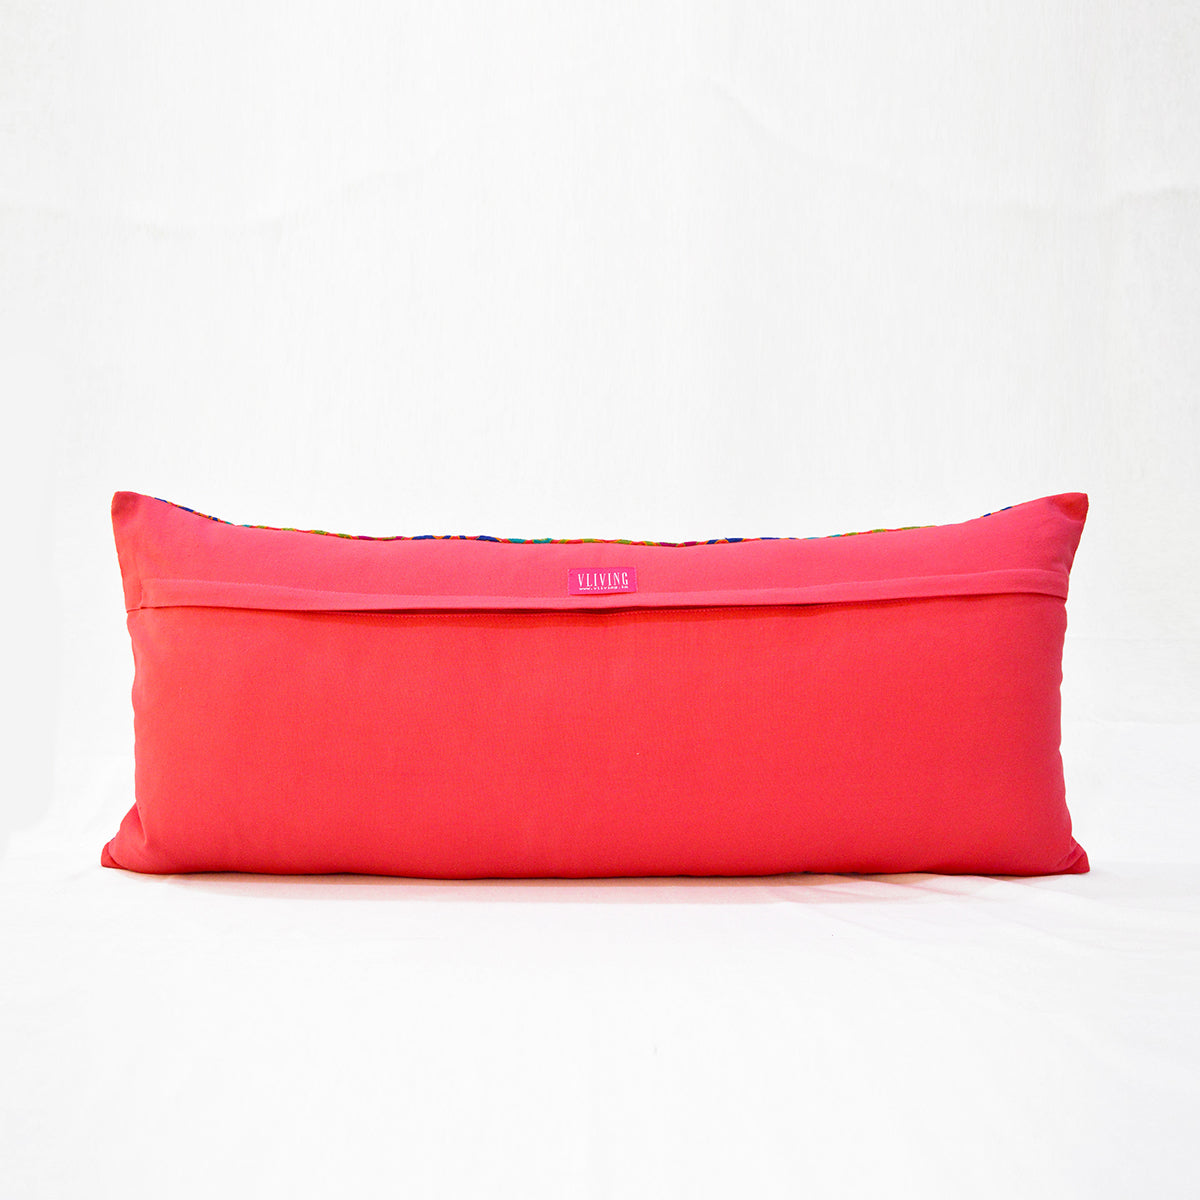 Coral Red cotton pillow cover with multicolour Shyrdak inspired embroidery, long lumbar pillow cover, 12X30 inches. other sizes available